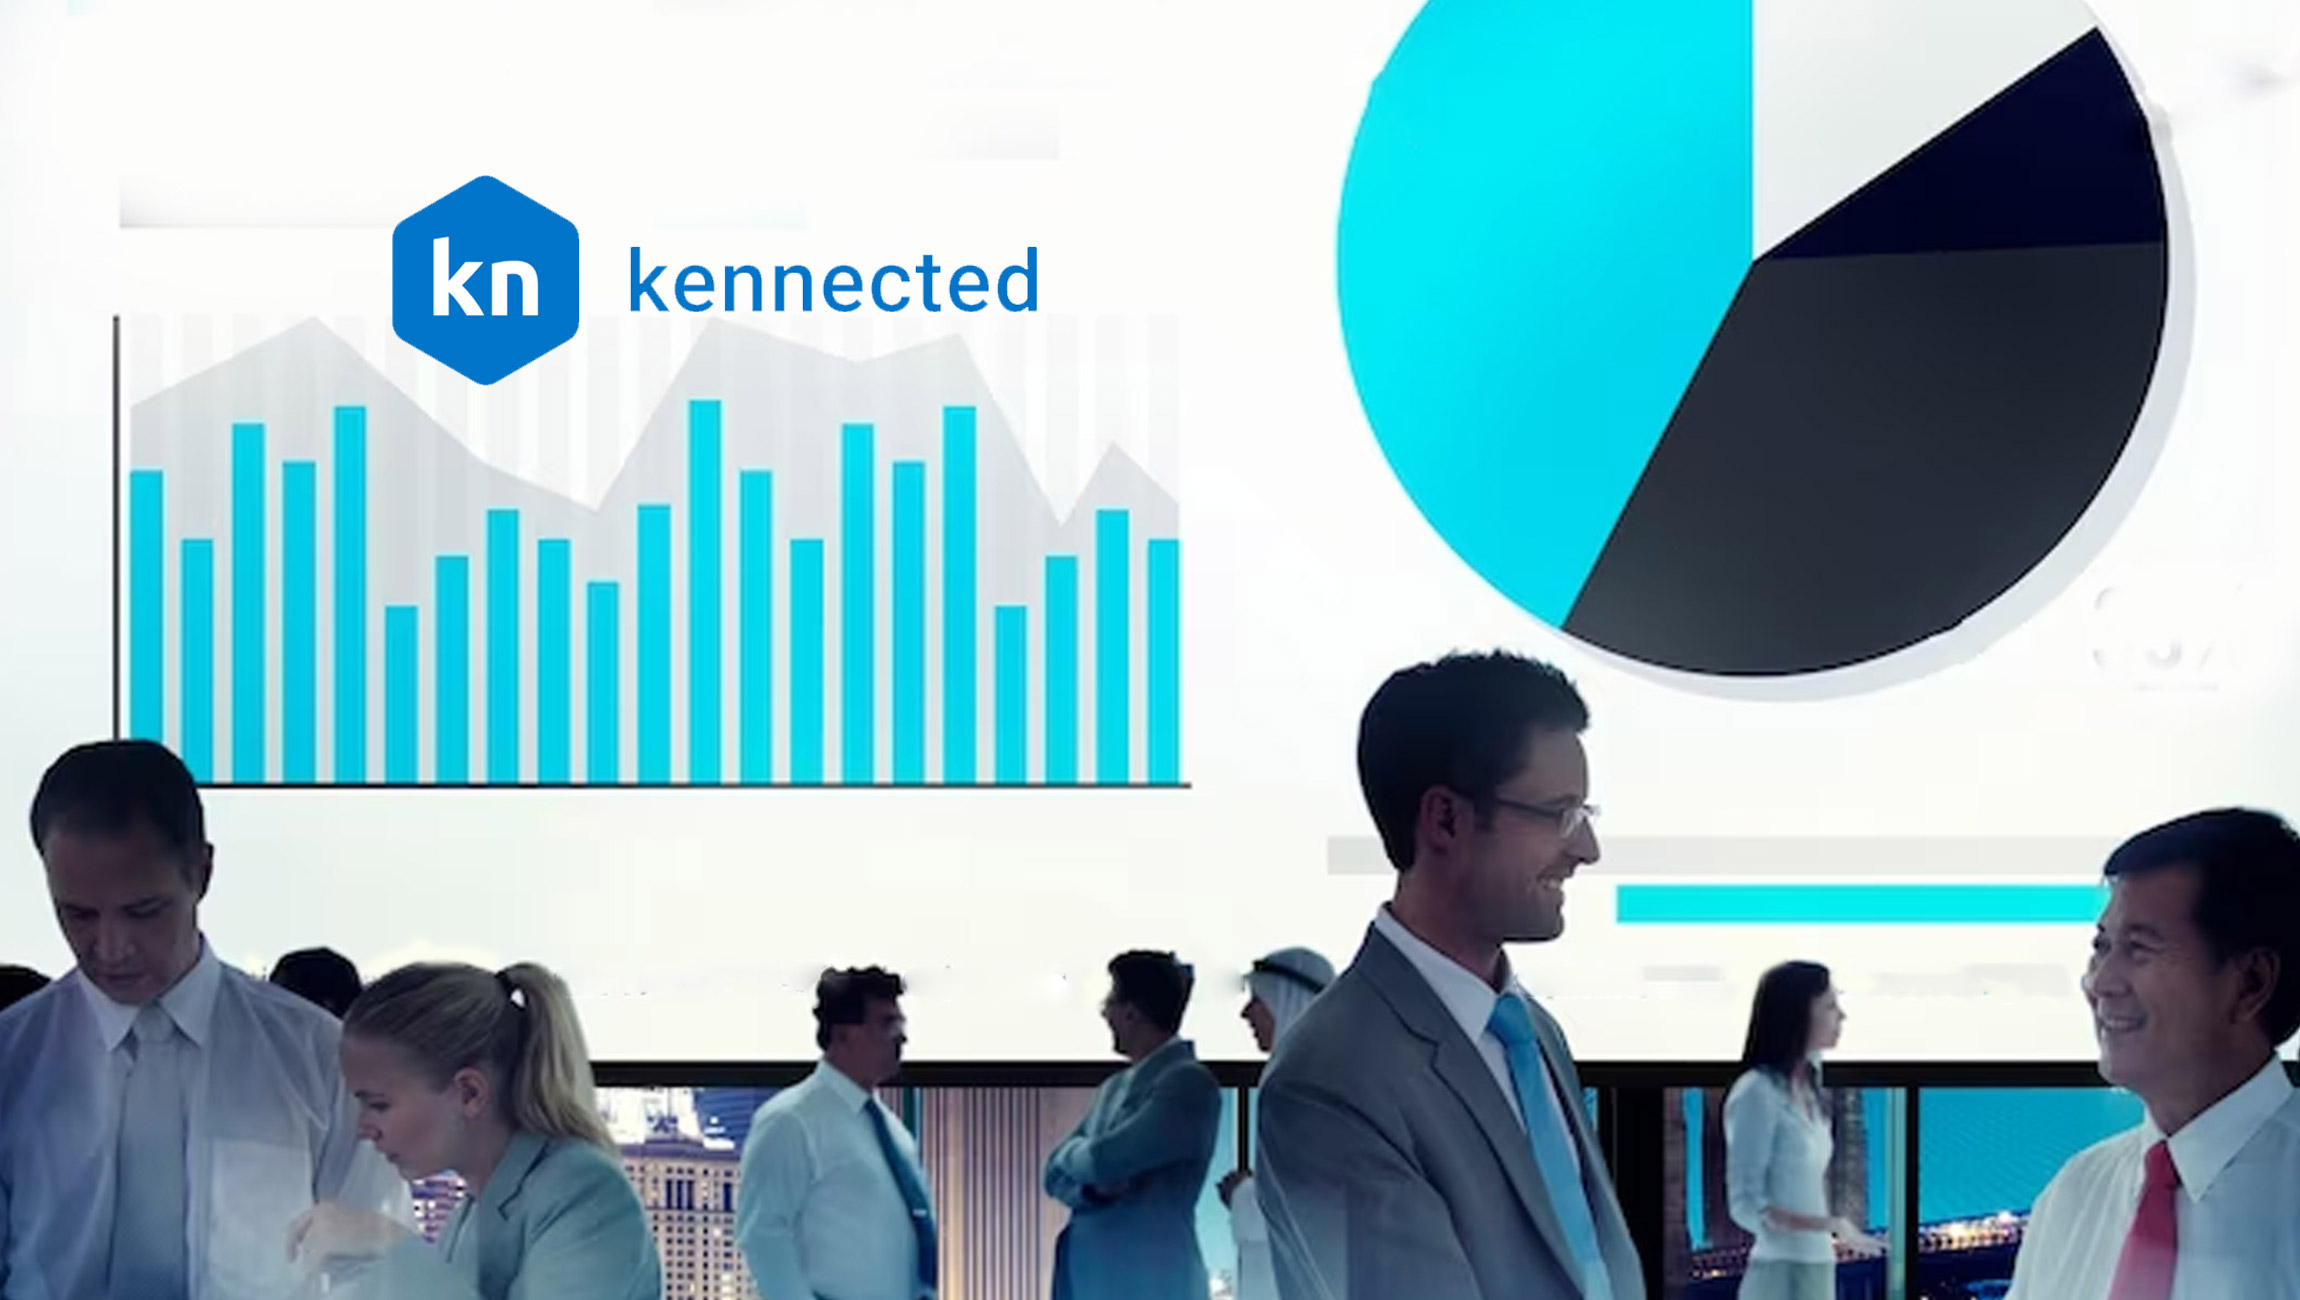 Kennected, Inc Launches Revolutionary Sales Enablement Tool, KennectedReach